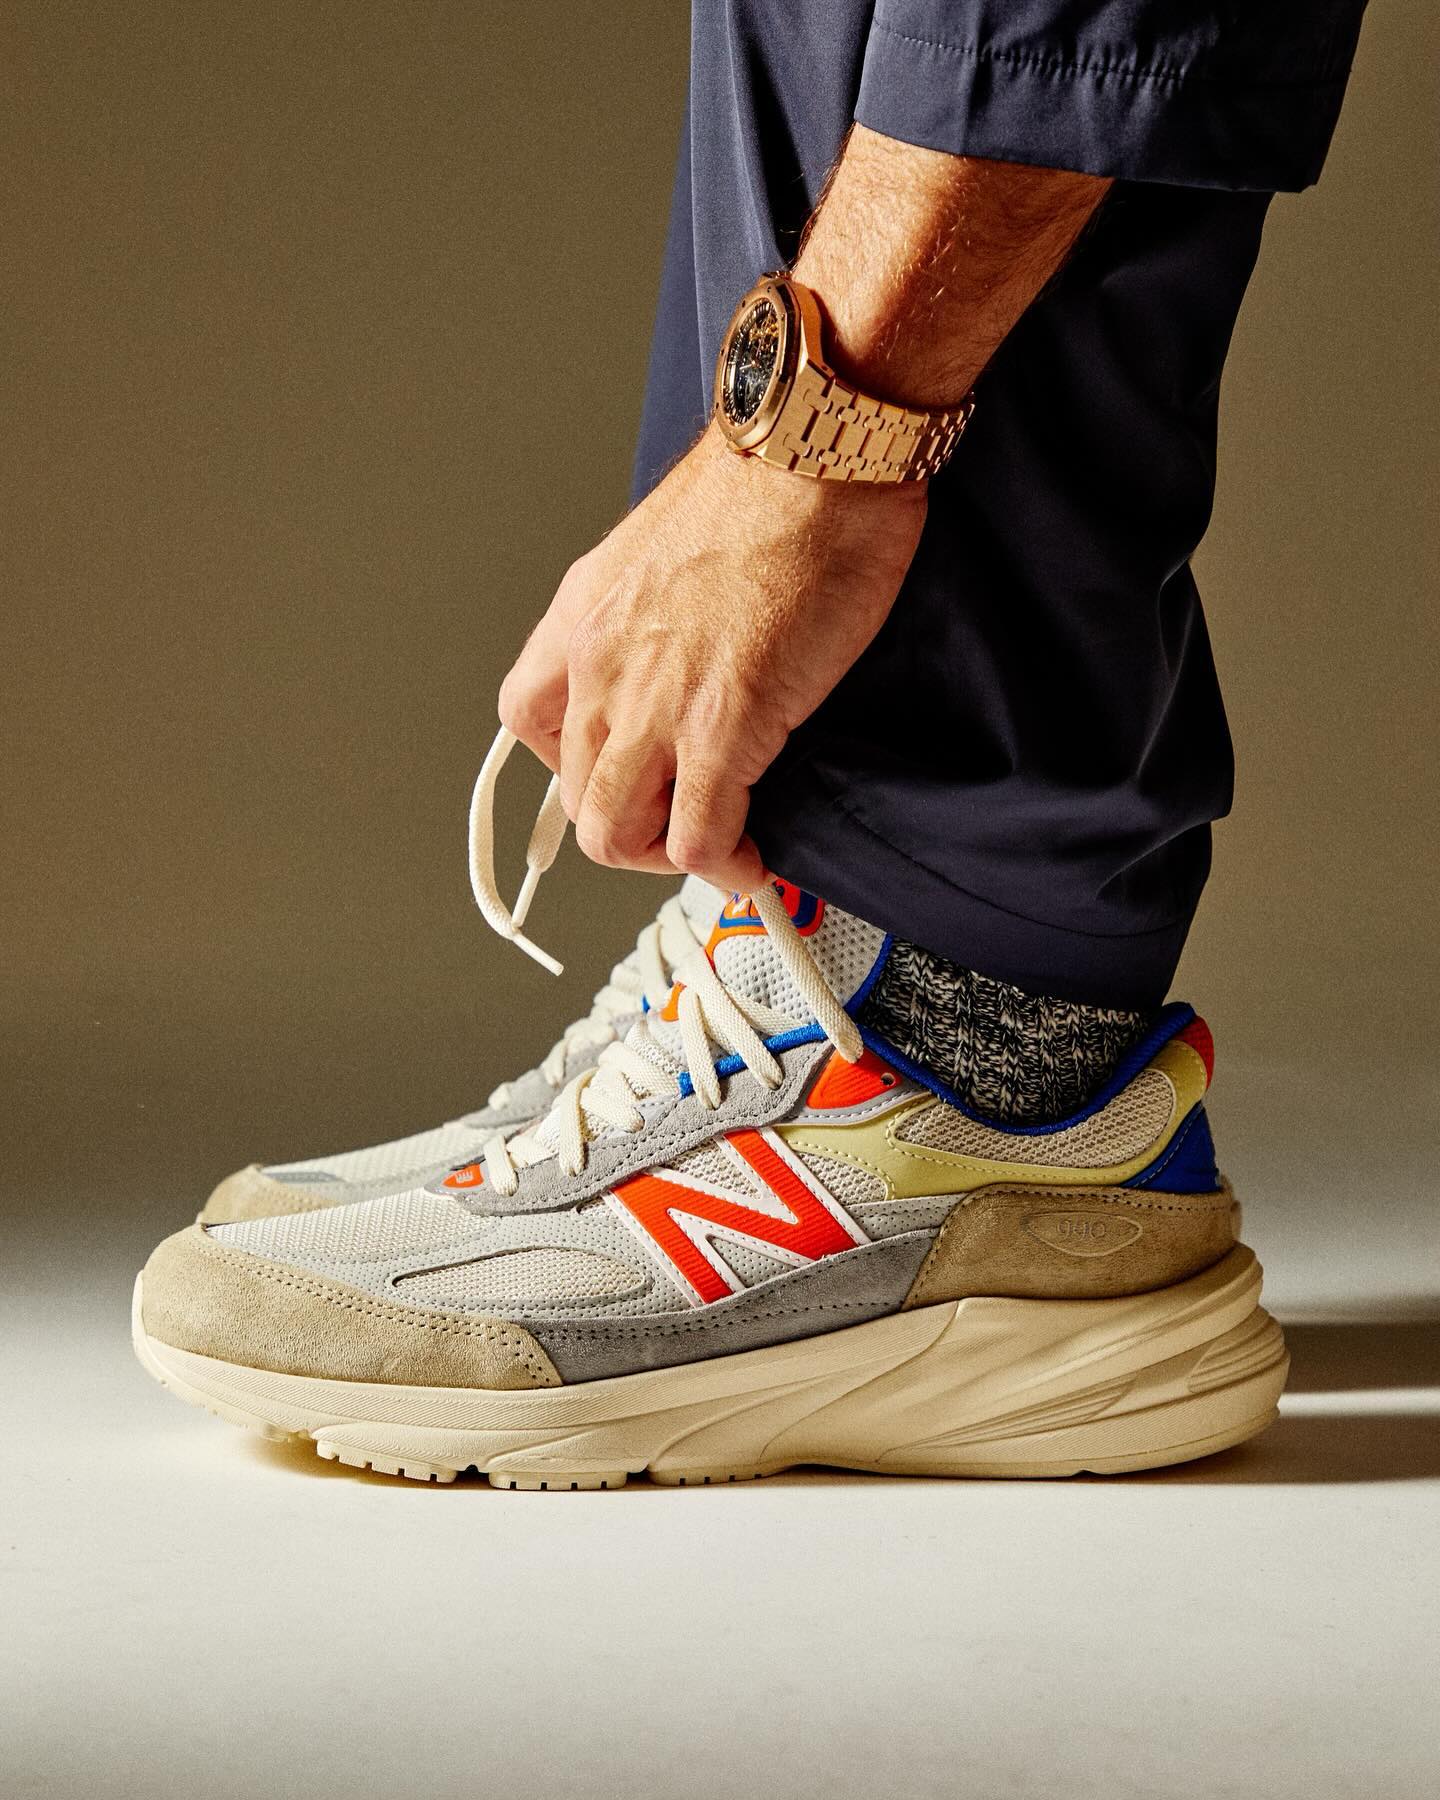 Ronnie Fieg wears the KITH x New Balance 990v6 "Sandrift" sneaker dropping in collaboration with Madison Square Garden